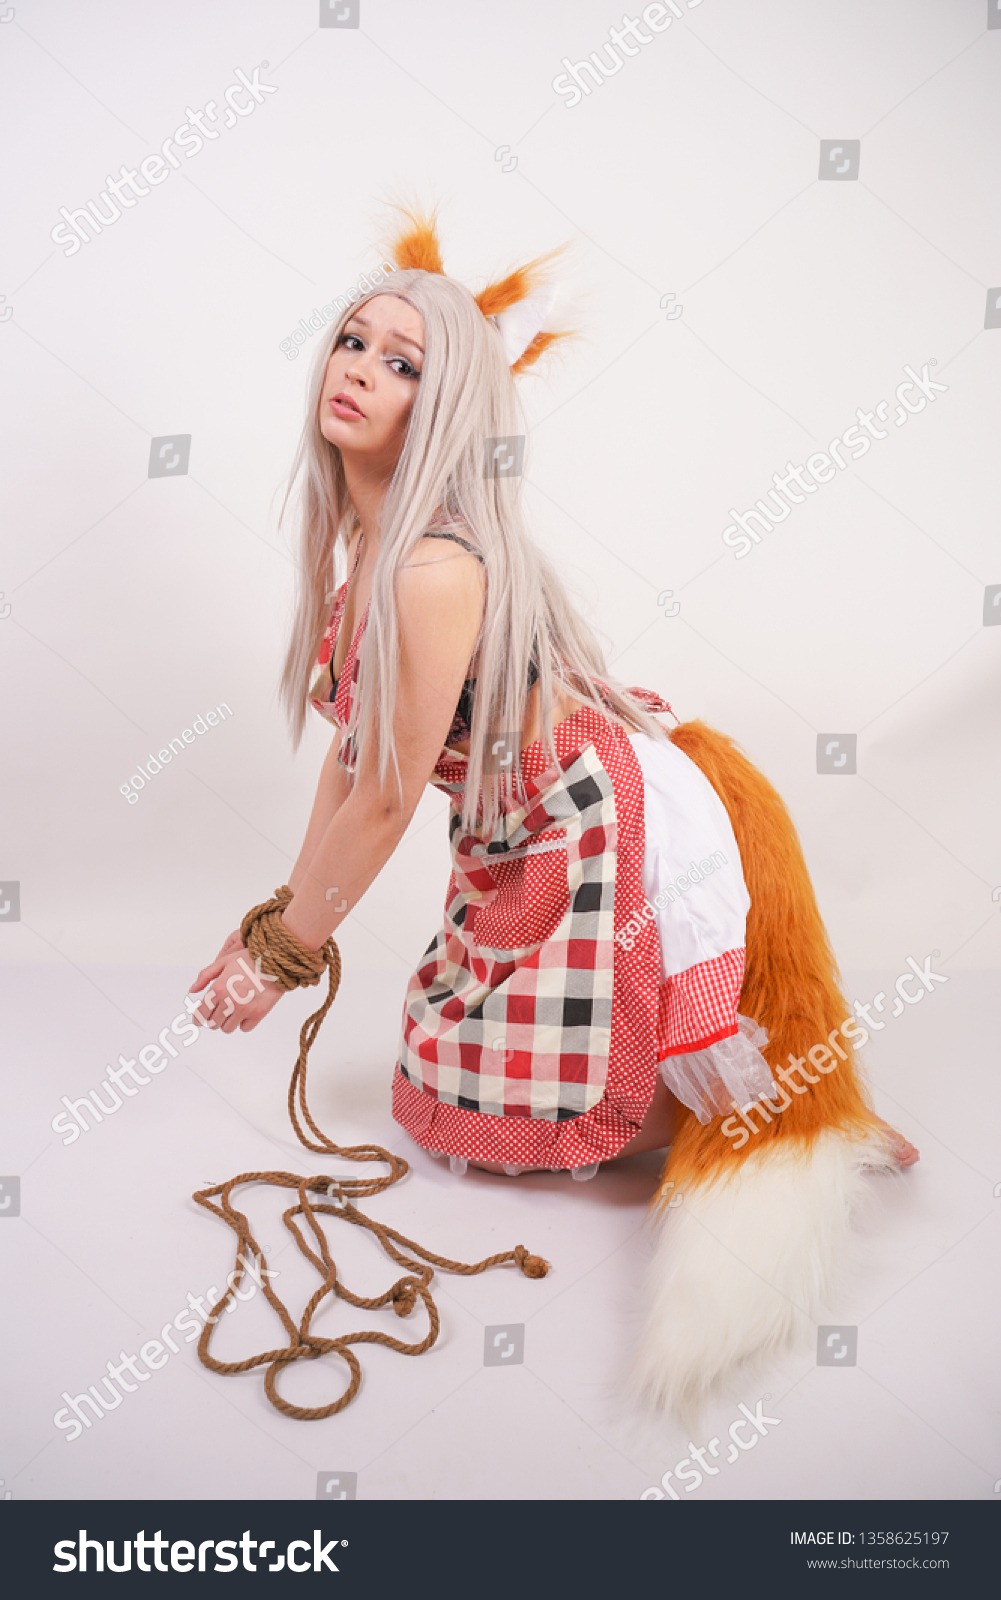 Girl With Fox Tail on balls